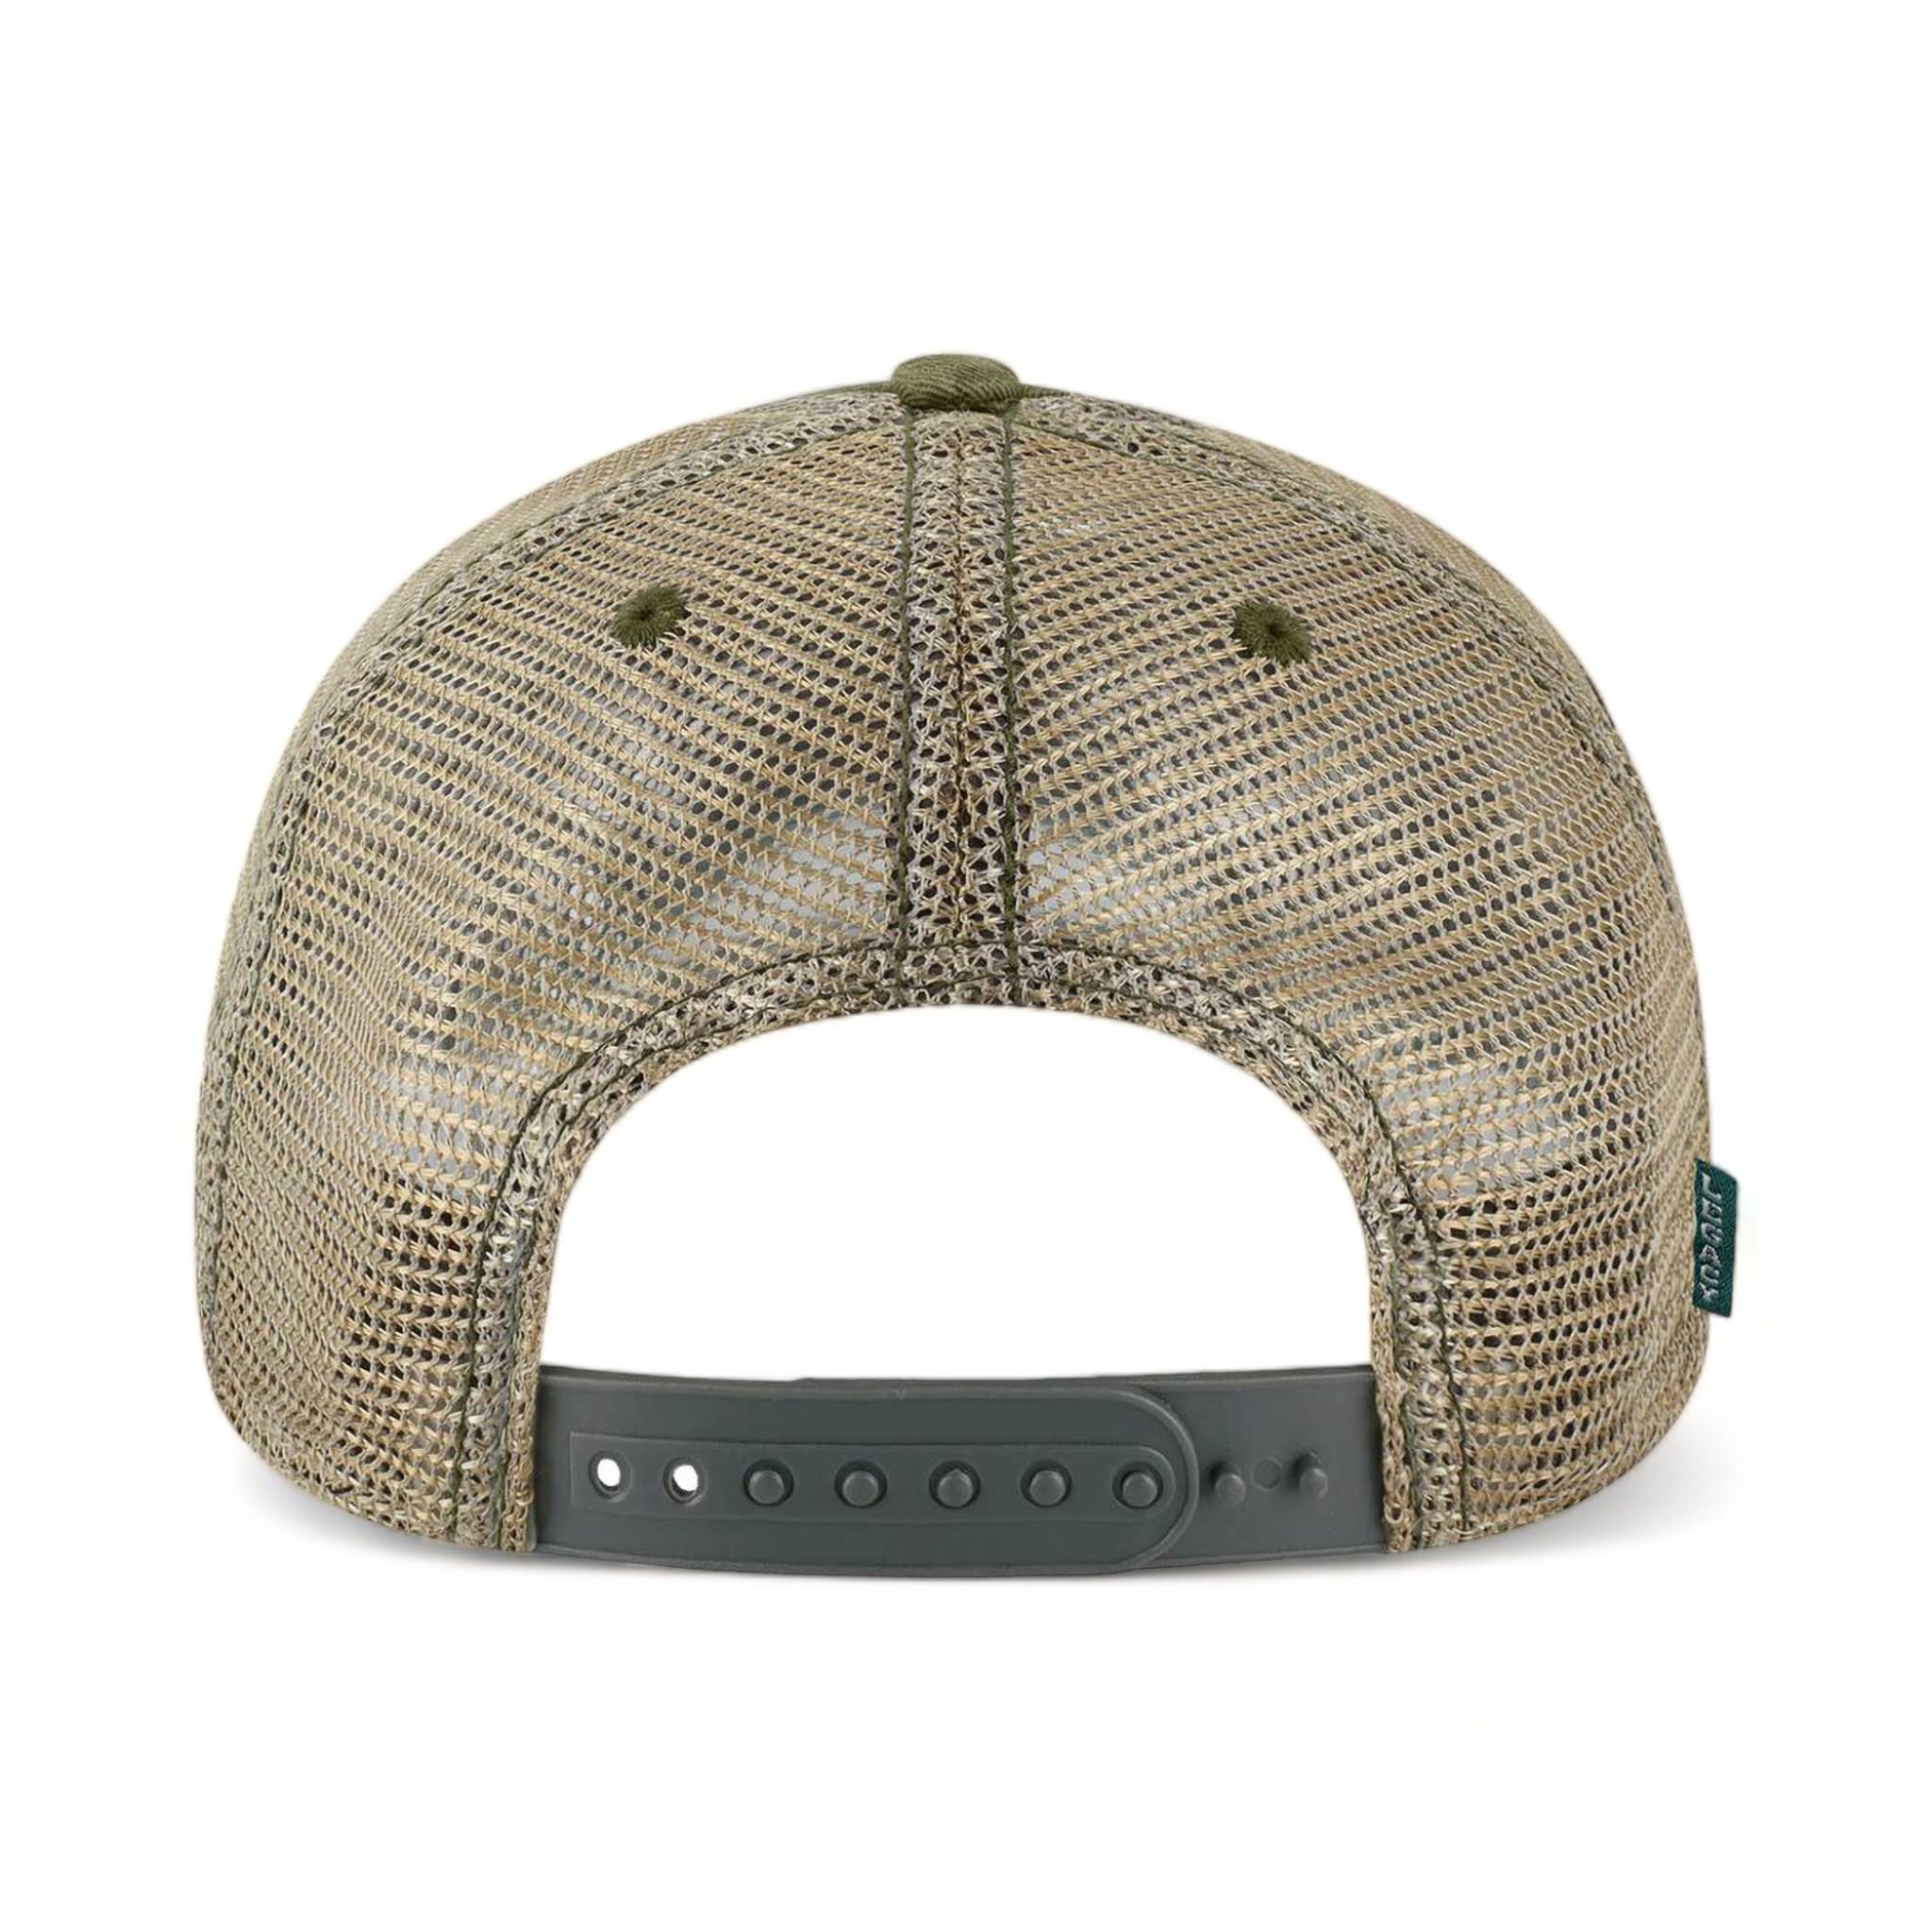 Back view of LEGACY OFA custom hat in green field camo and java